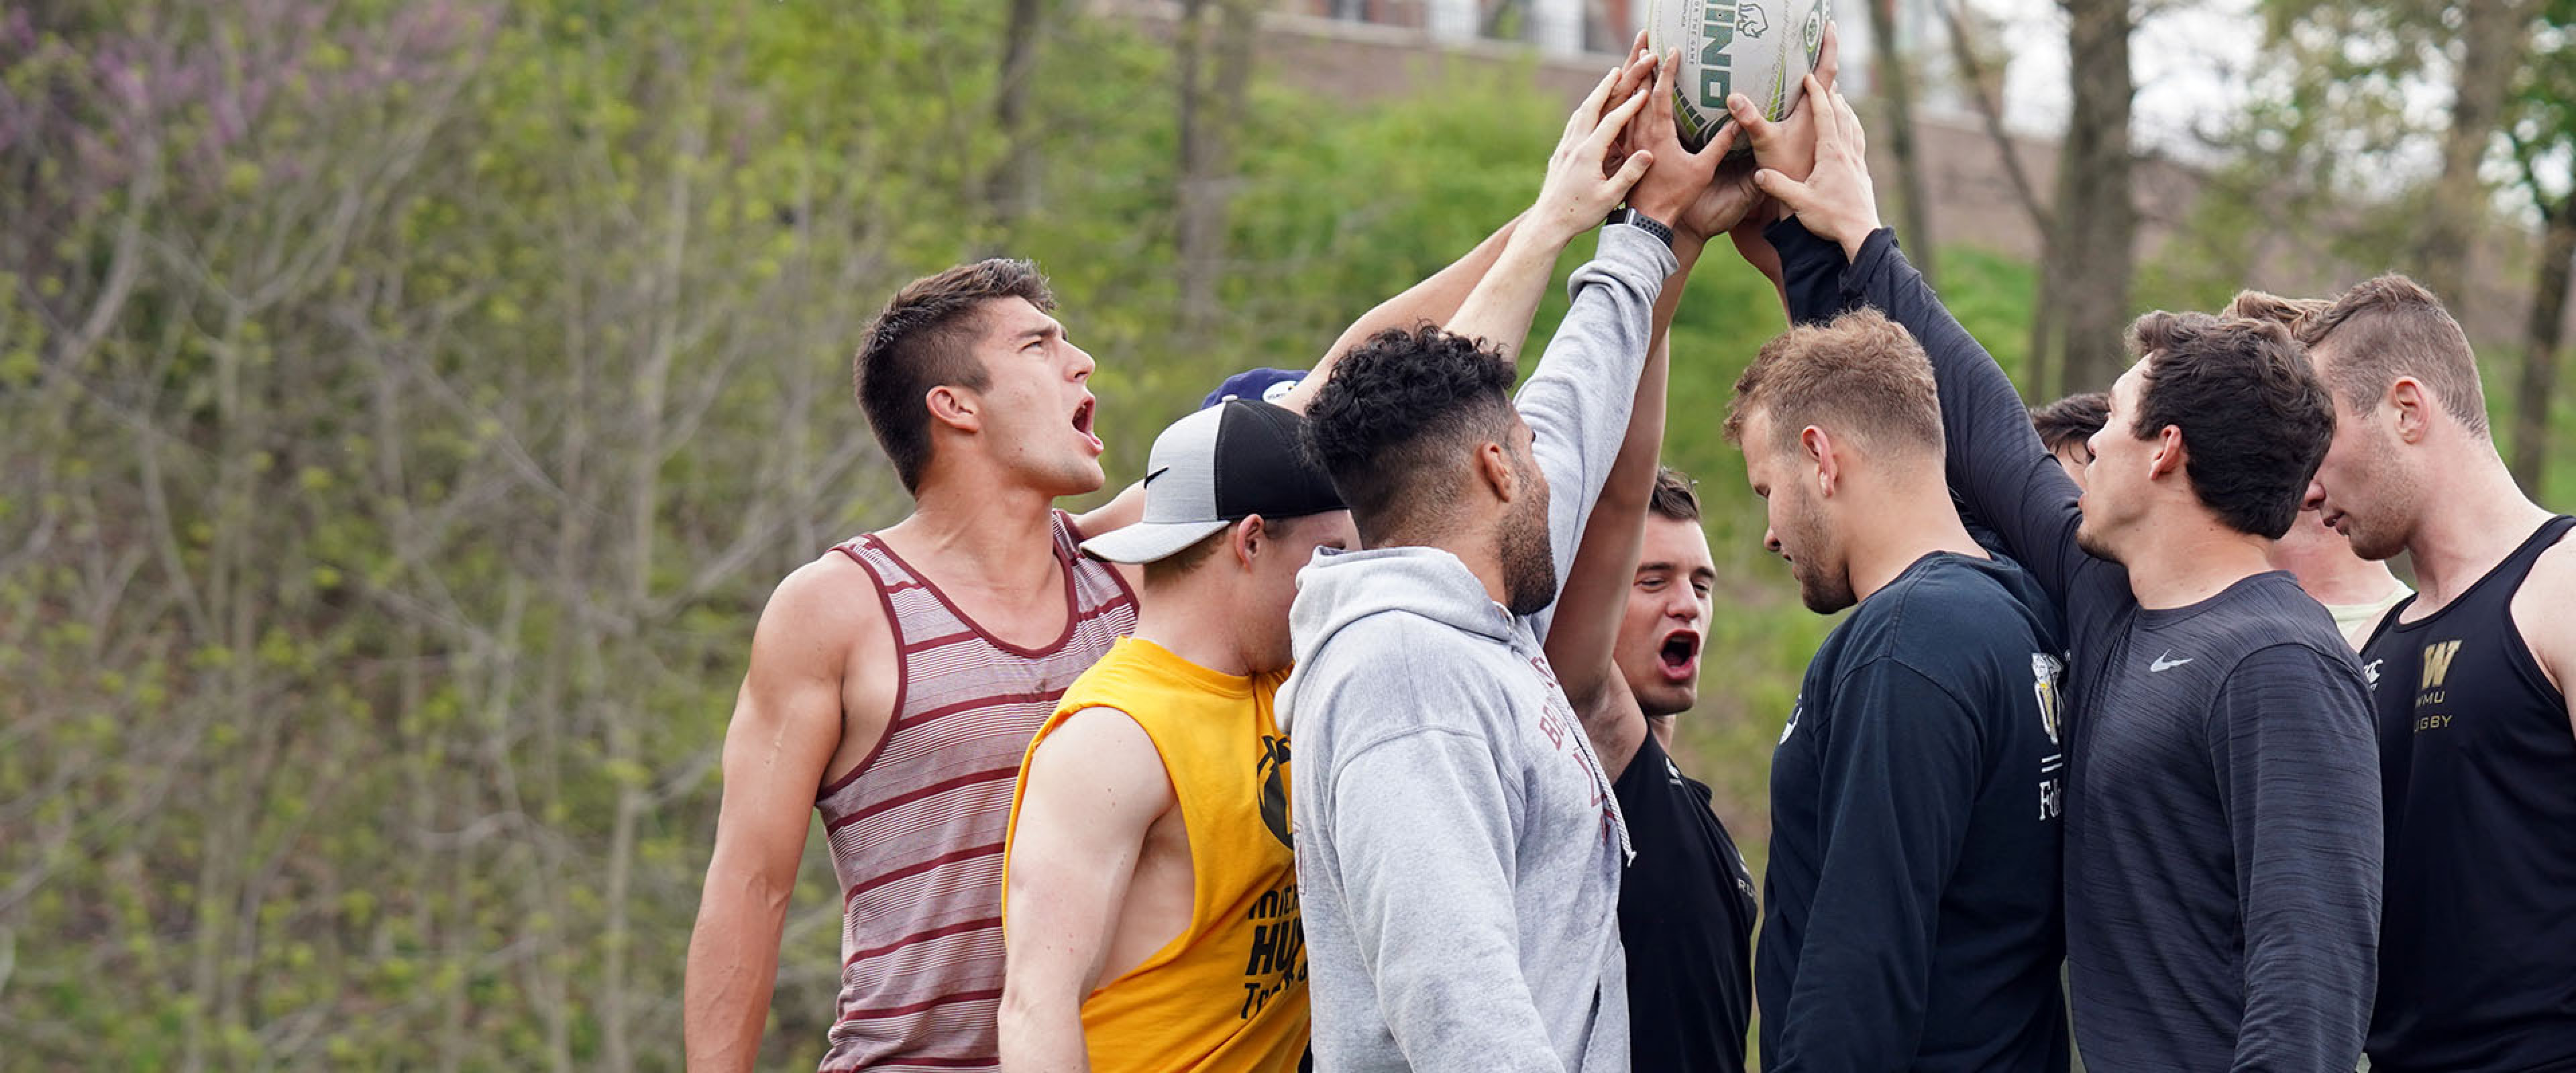 A group of WMU students doing a team cheer before a rugby match